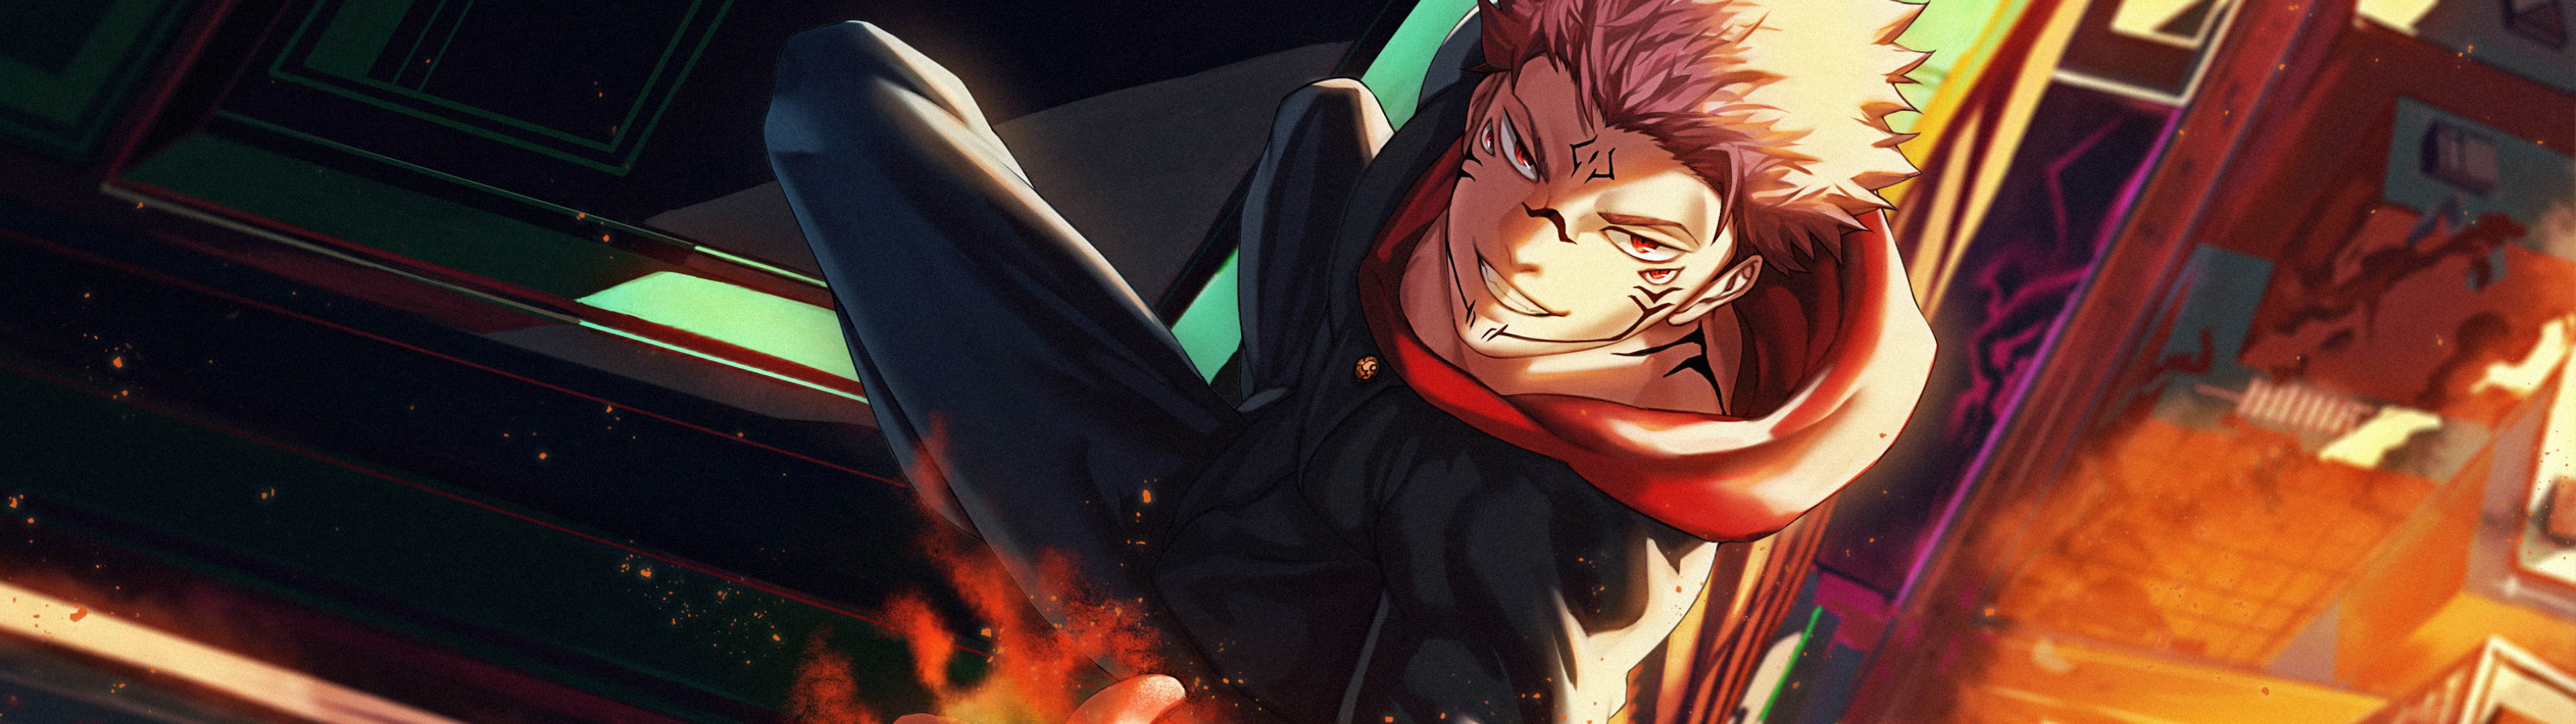 3840x1080 Sukuna Hd New Jujutsu Kaisen 3840x1080 Resolution Wallpaper Hd Anime 4k Wallpapers Images Photos And Background Wallpapers Den